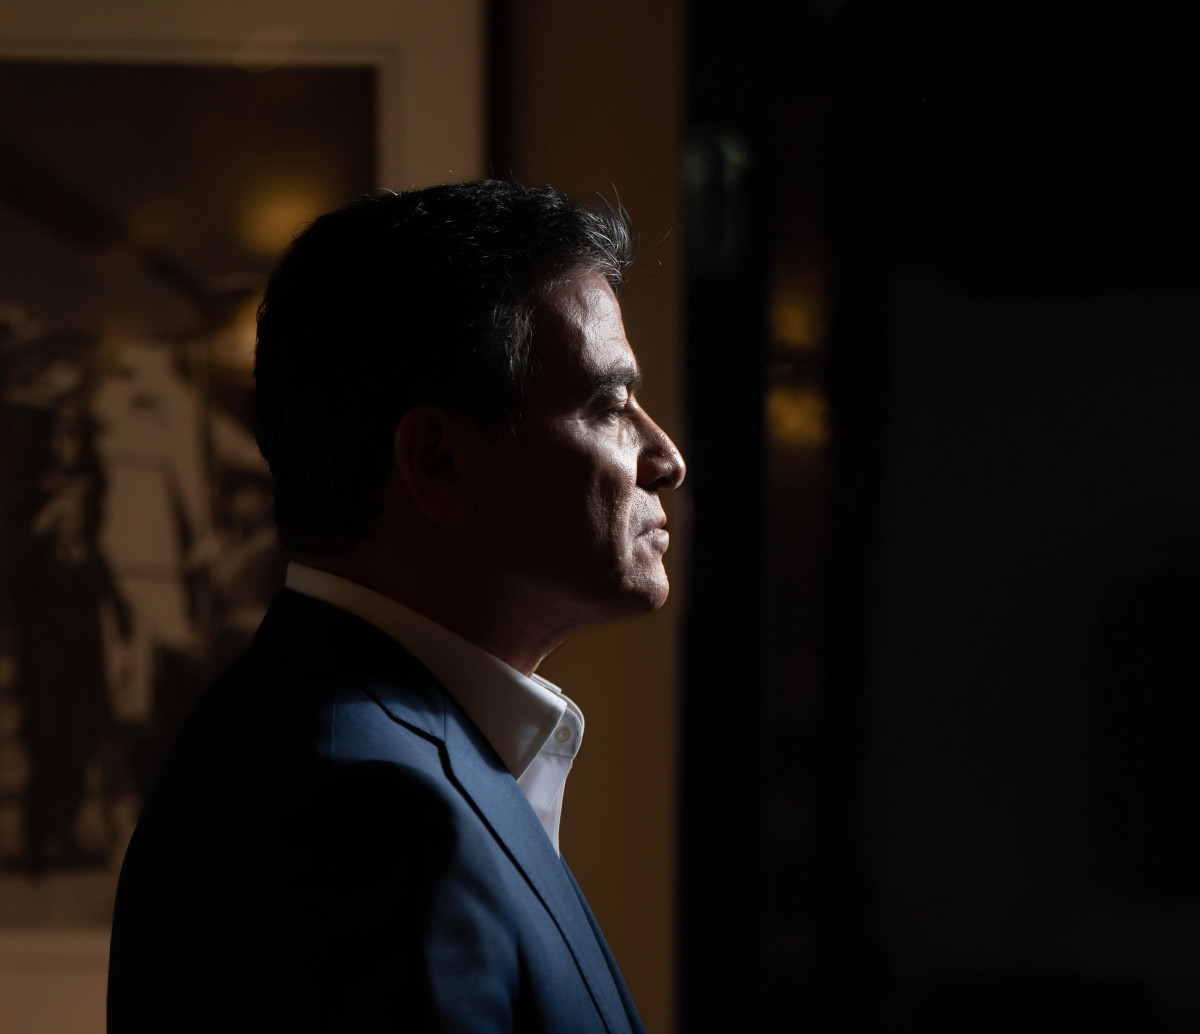 Yossi Cohen reportedly threatened former Hague prosecutor, The Guardian reveals